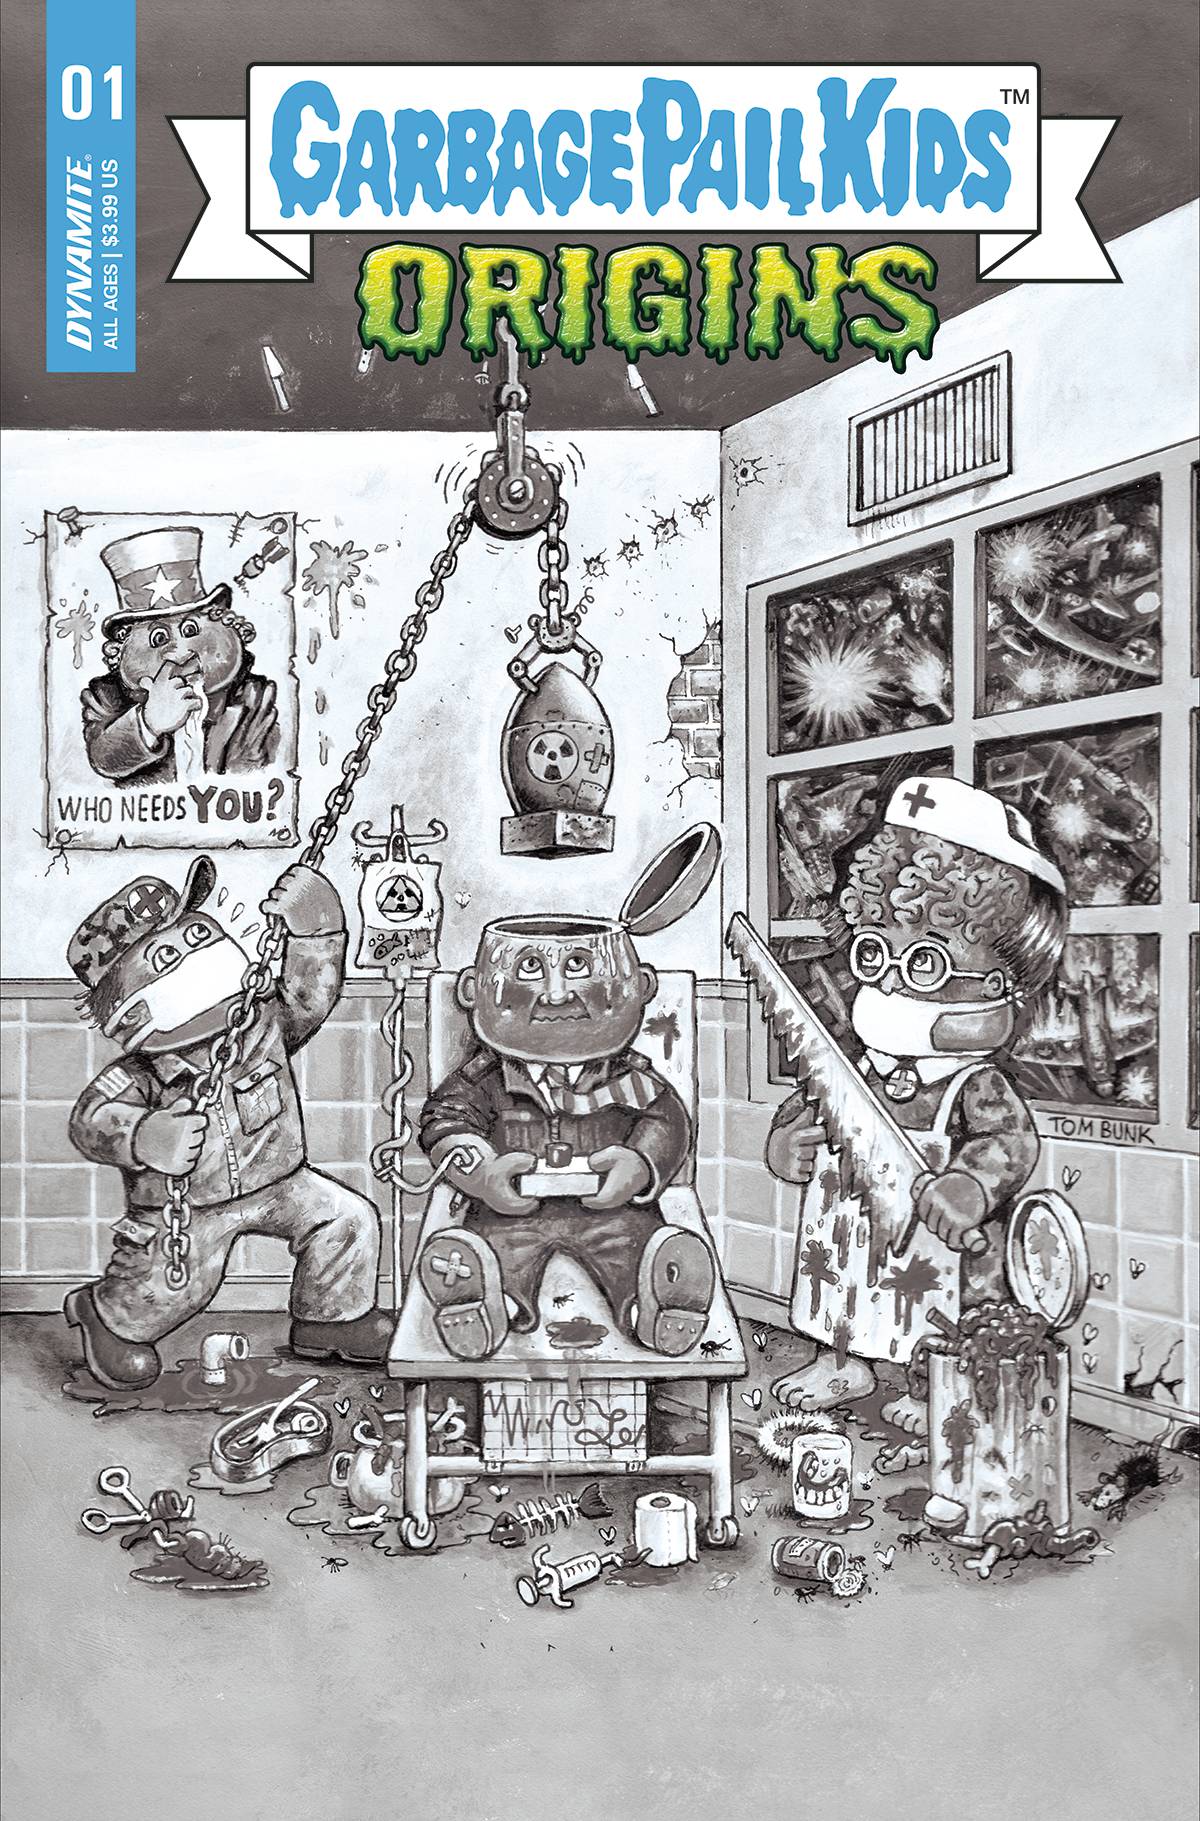 Garbage Pail Kids Origins #1 Cover F 1 for 10 Incentive Bunk Black & White